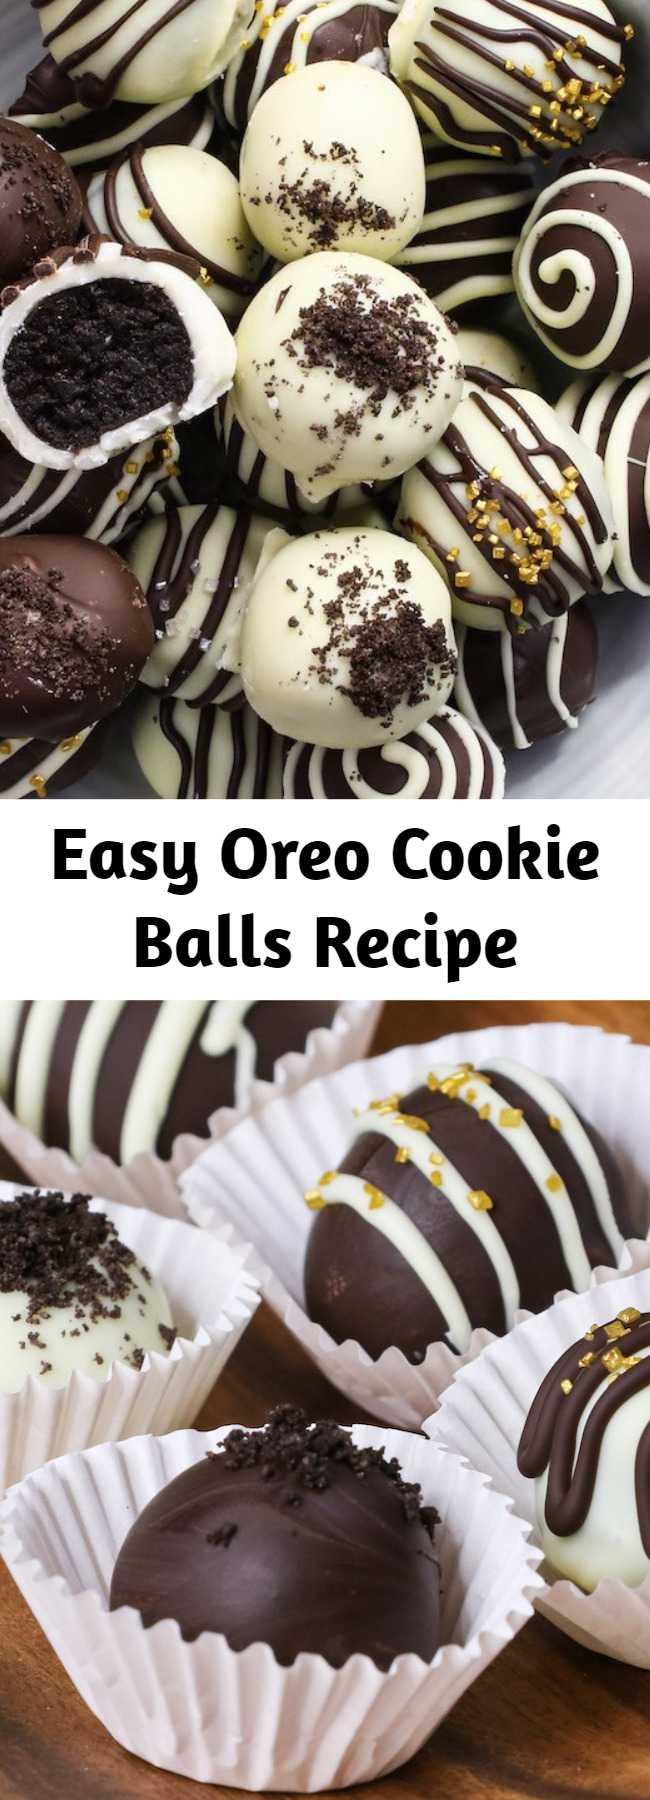 Easy Oreo Cookie Balls Recipe - Oreo Cookie Balls are a creamy and rich bite-sized no-bake treat: crushed oreo cookies are mixed with cream cheese, and then these oreo balls are coated with melted chocolate. Only 3 ingredients! They are an easy dessert for holidays such as Christmas!